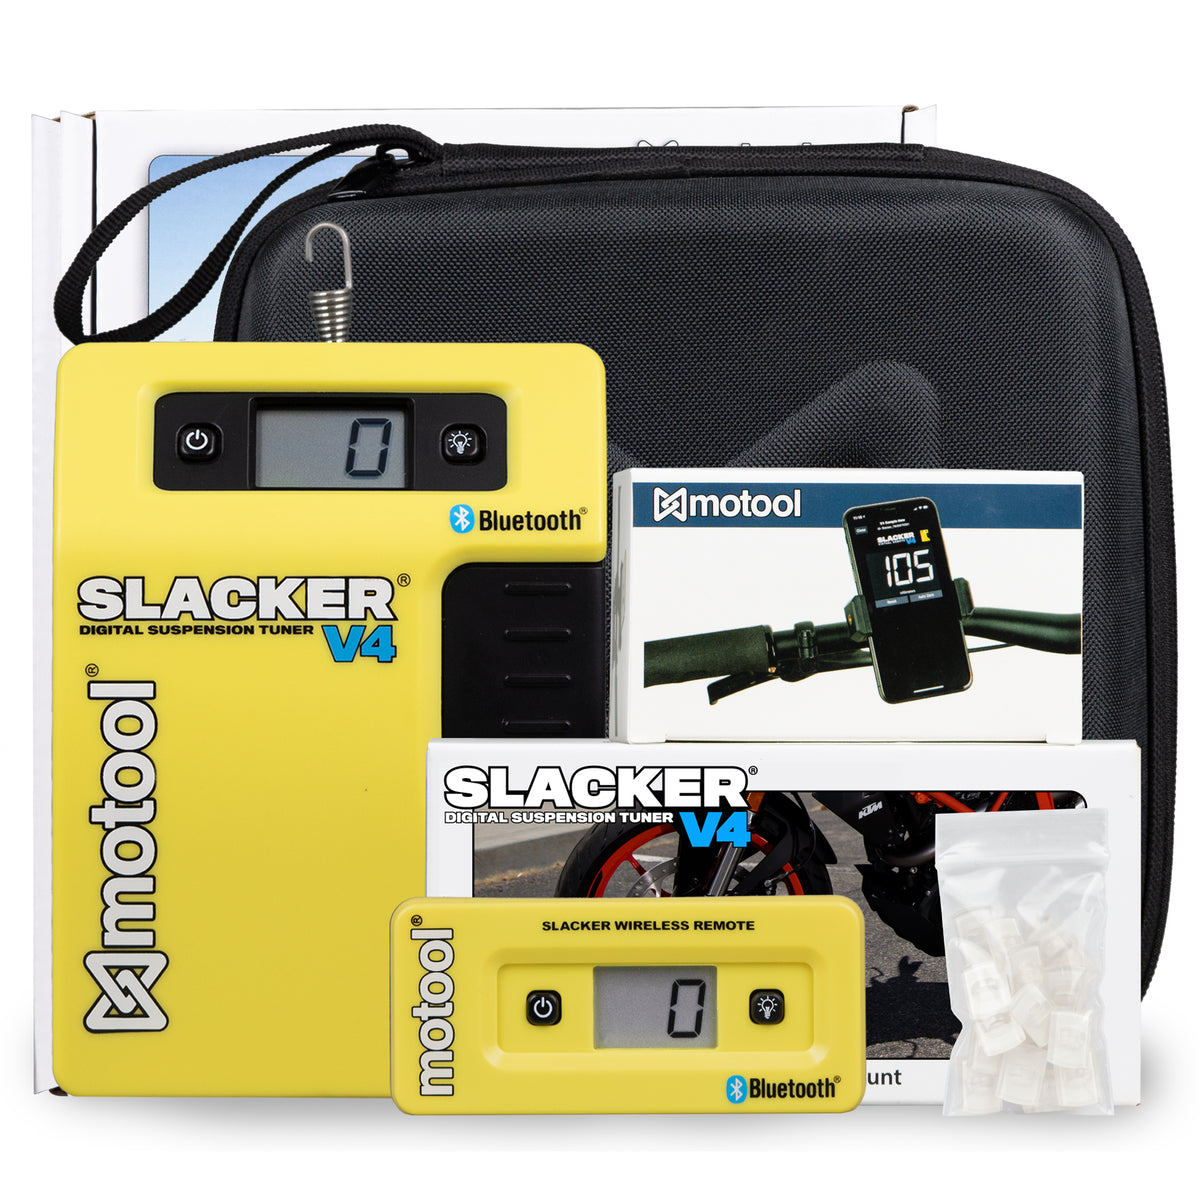 Slacker digital suspension tuner for setting sag on motorcycles and mountain bikes.